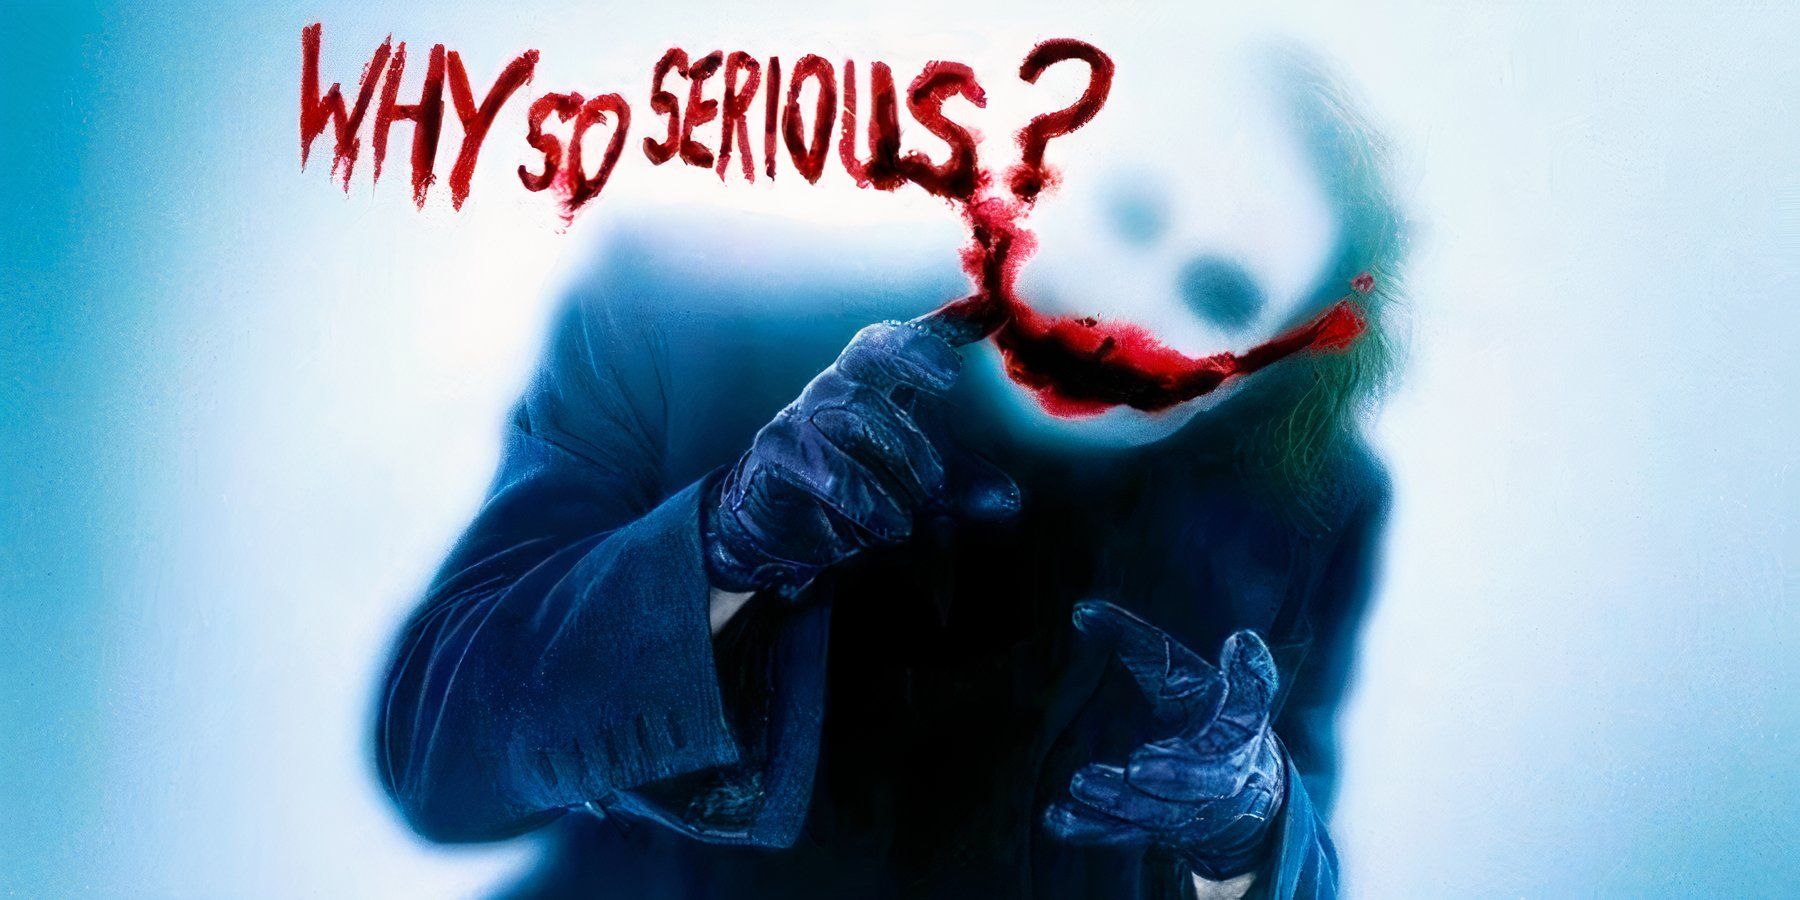 The Joker stands behind a frosted windowpane, painting the words “Why So Serious” onto the glass in blood.